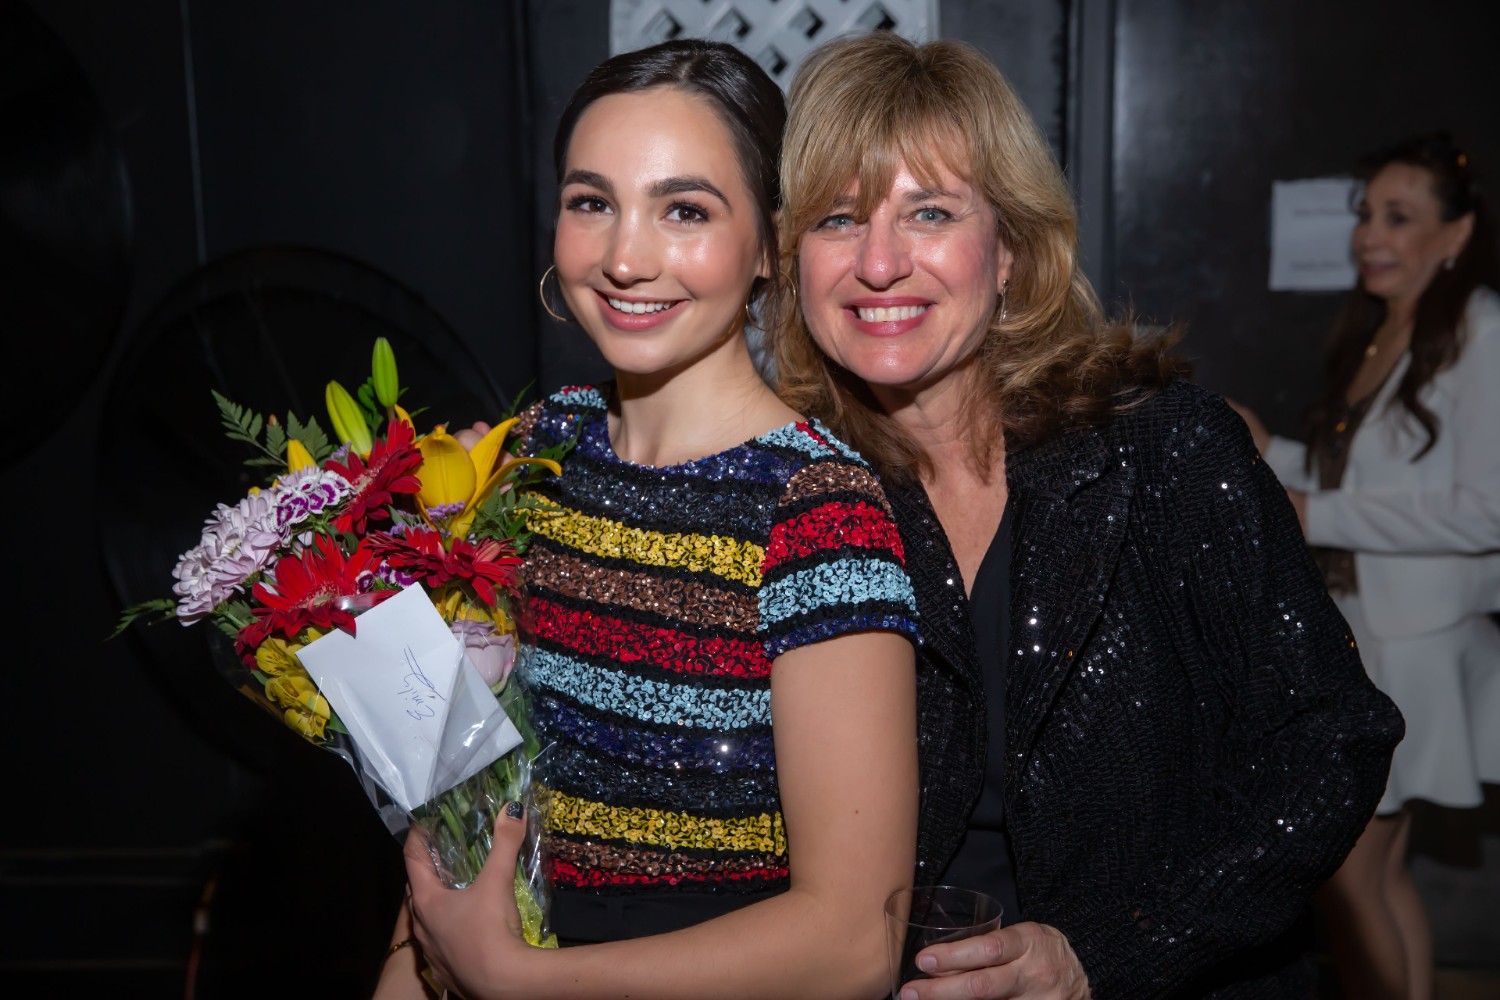 Emily Bear and Maestra Green backstage after the LAJS 25th Anniversary Gala in 2019.